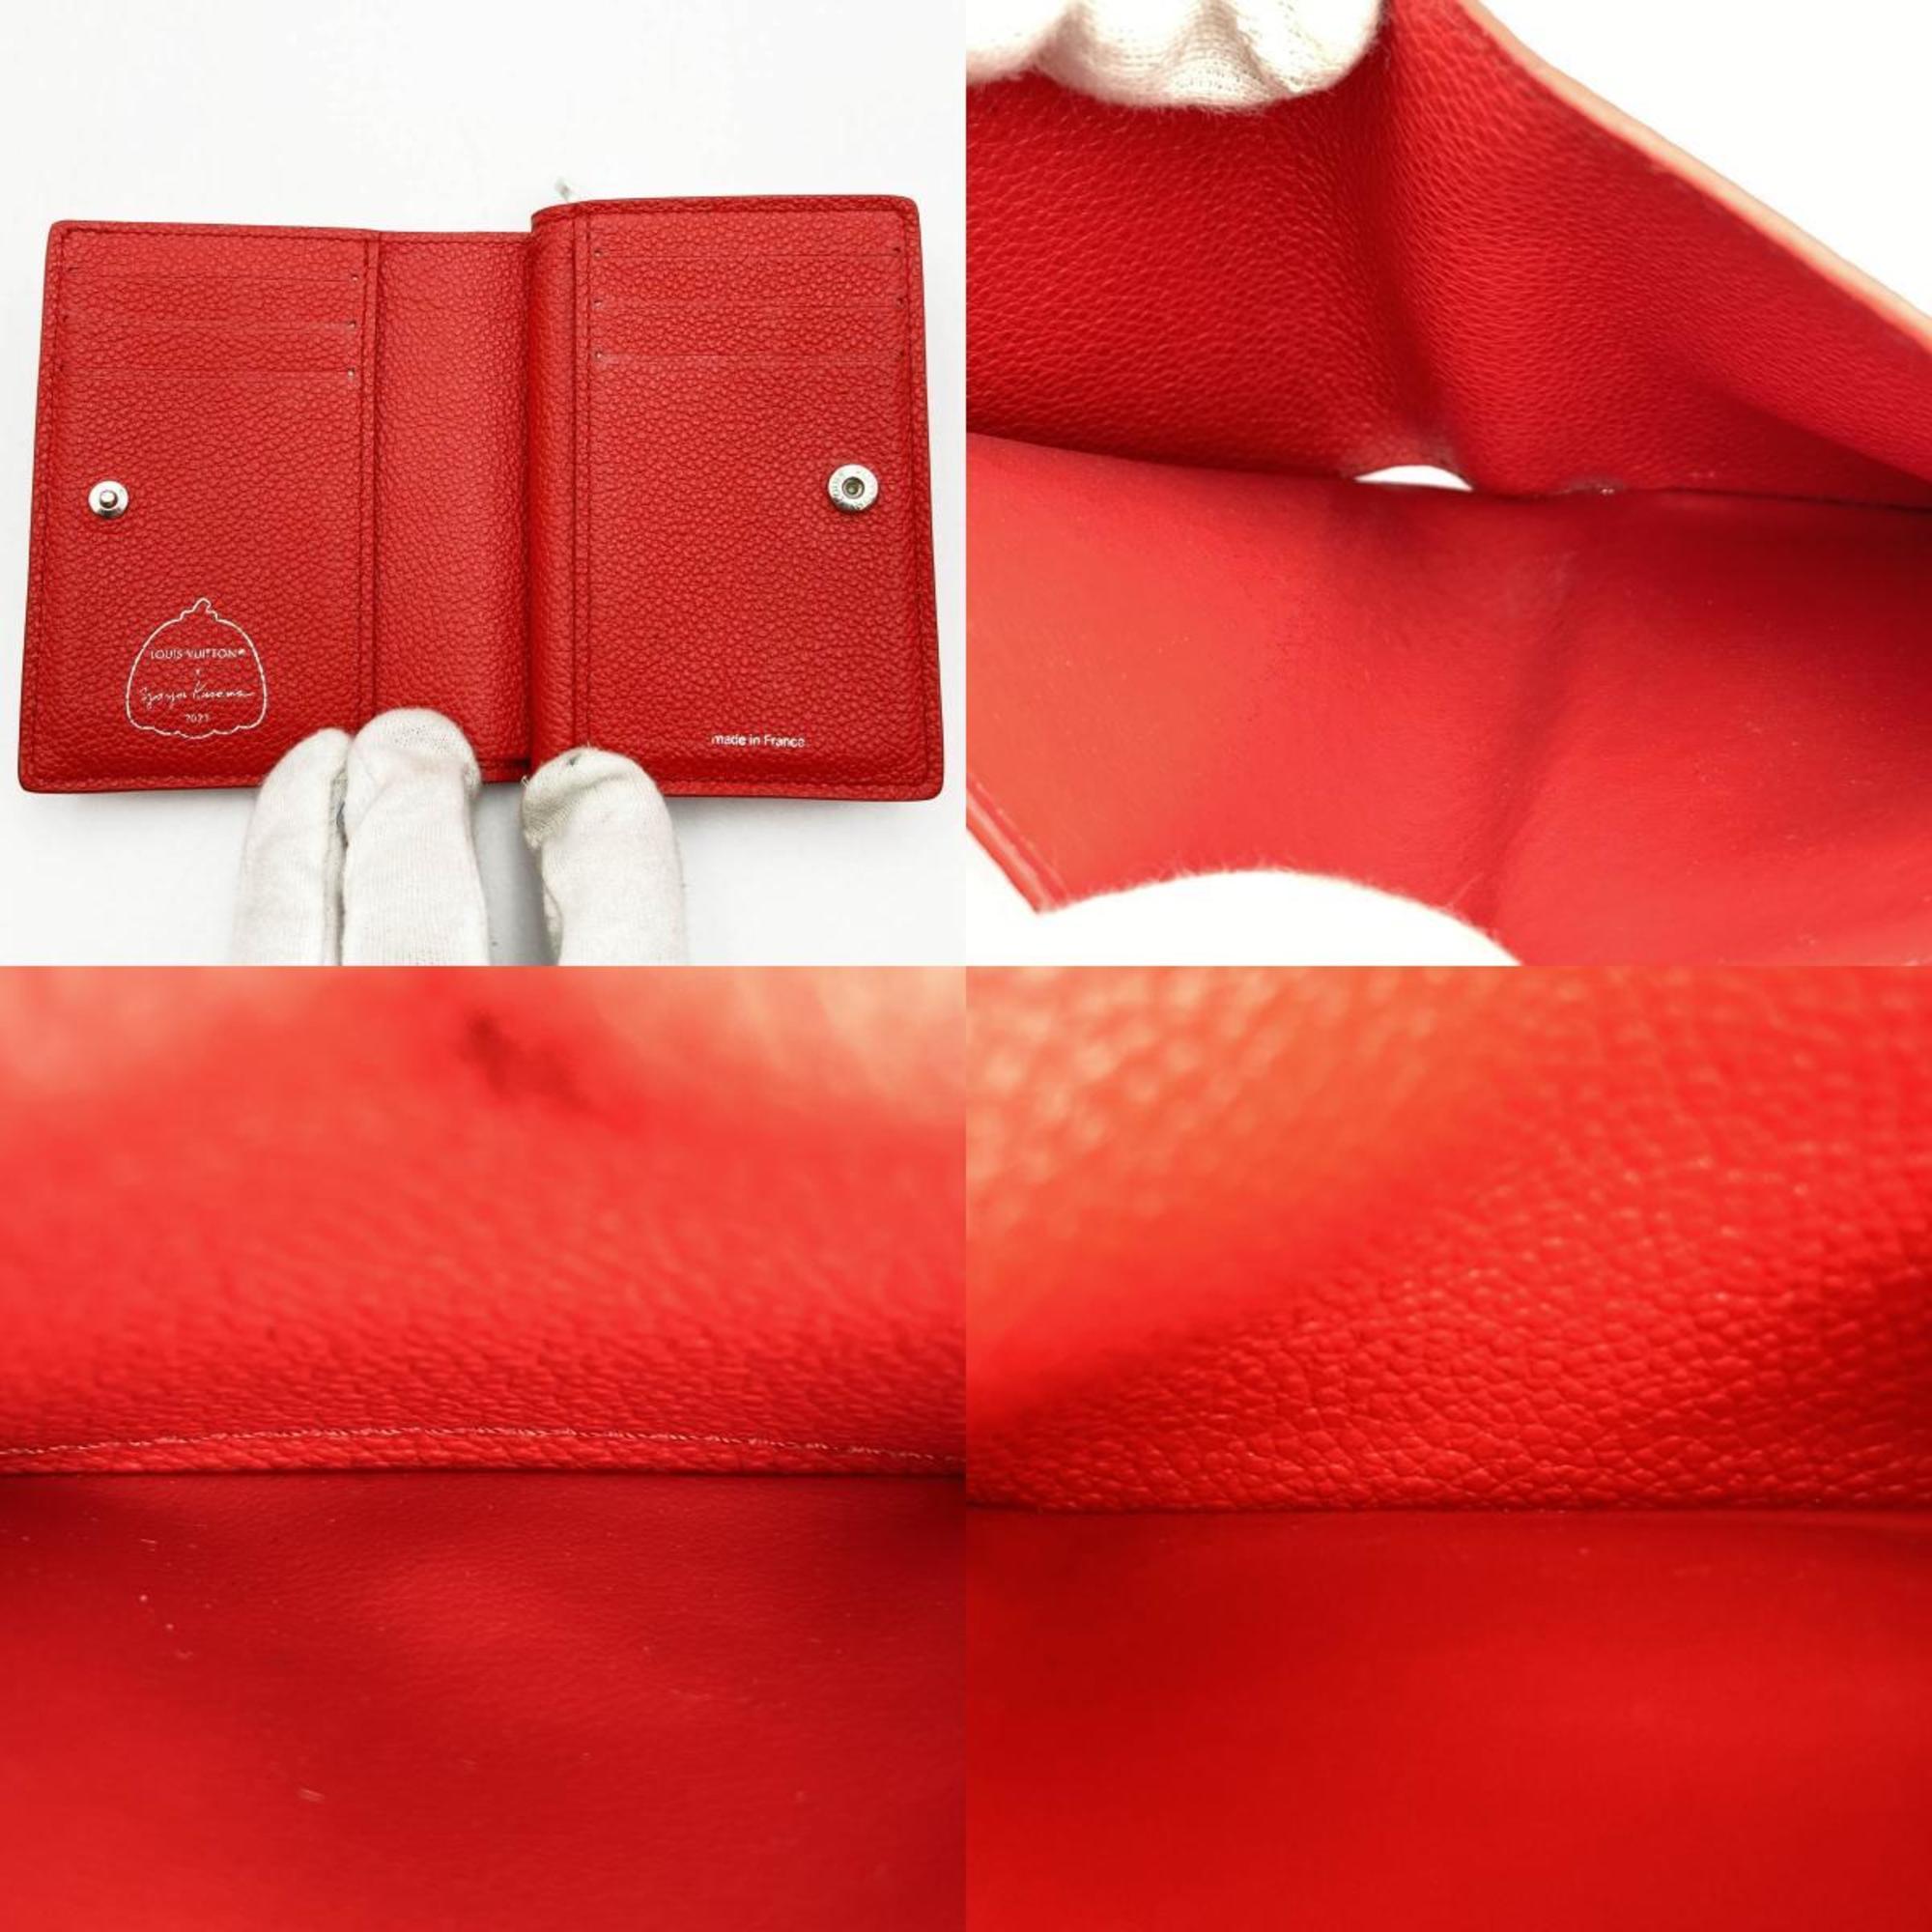 Louis Vuitton M82103 Bifold Wallet Mini Portefeuille Claire Japan Limited Yayoi Kusama Monogram Empreinte Leather Rouge Blanc Red White Polka Dot Box Included